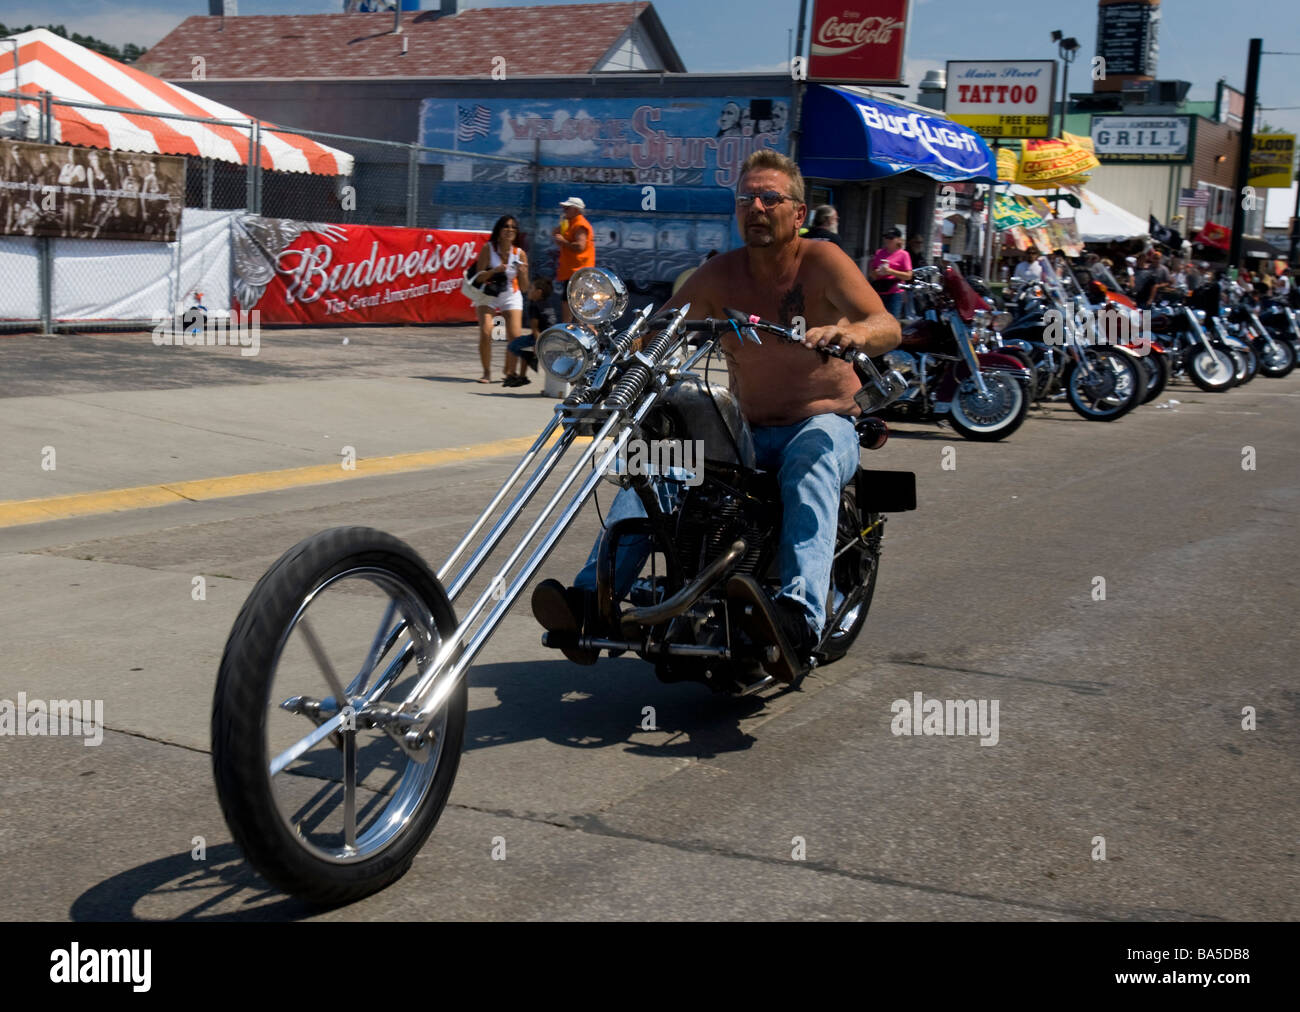 Motorbikes and riders come in all shapes sizes and ages annual Sturgis Motorcycle Rally South Dakota USA Stock Photo